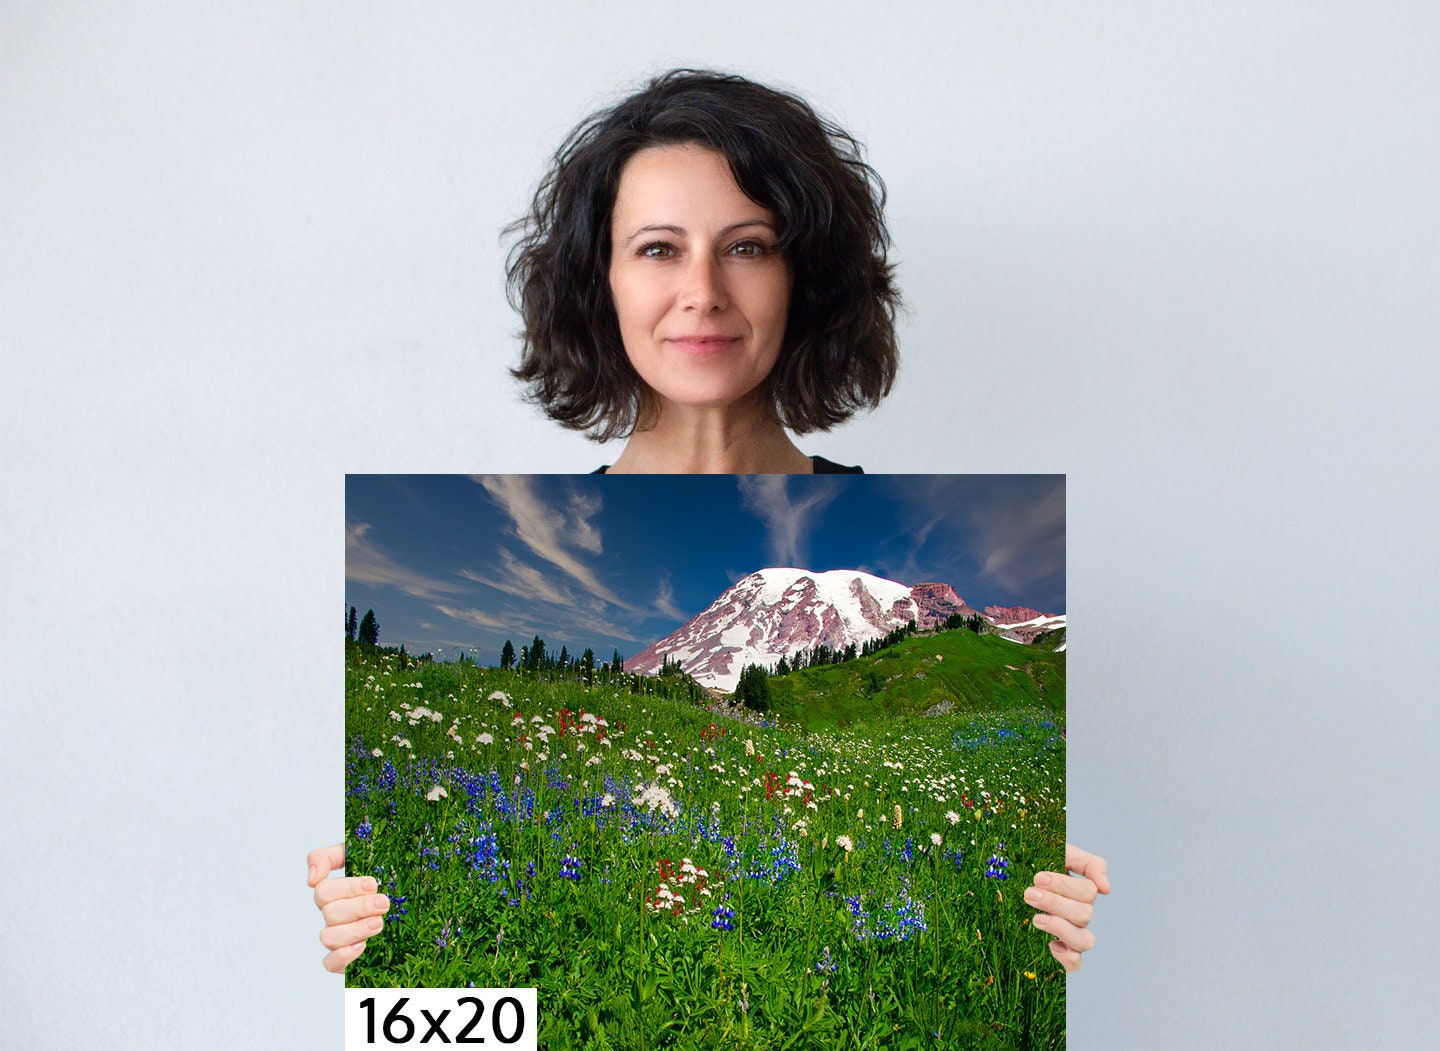 Wildflowers on Mountainside, Mt. Ranier National Park, Snowy Mountain Landscape, Wall Decor Ideal for Home, Living Room, Bedroom Or Office